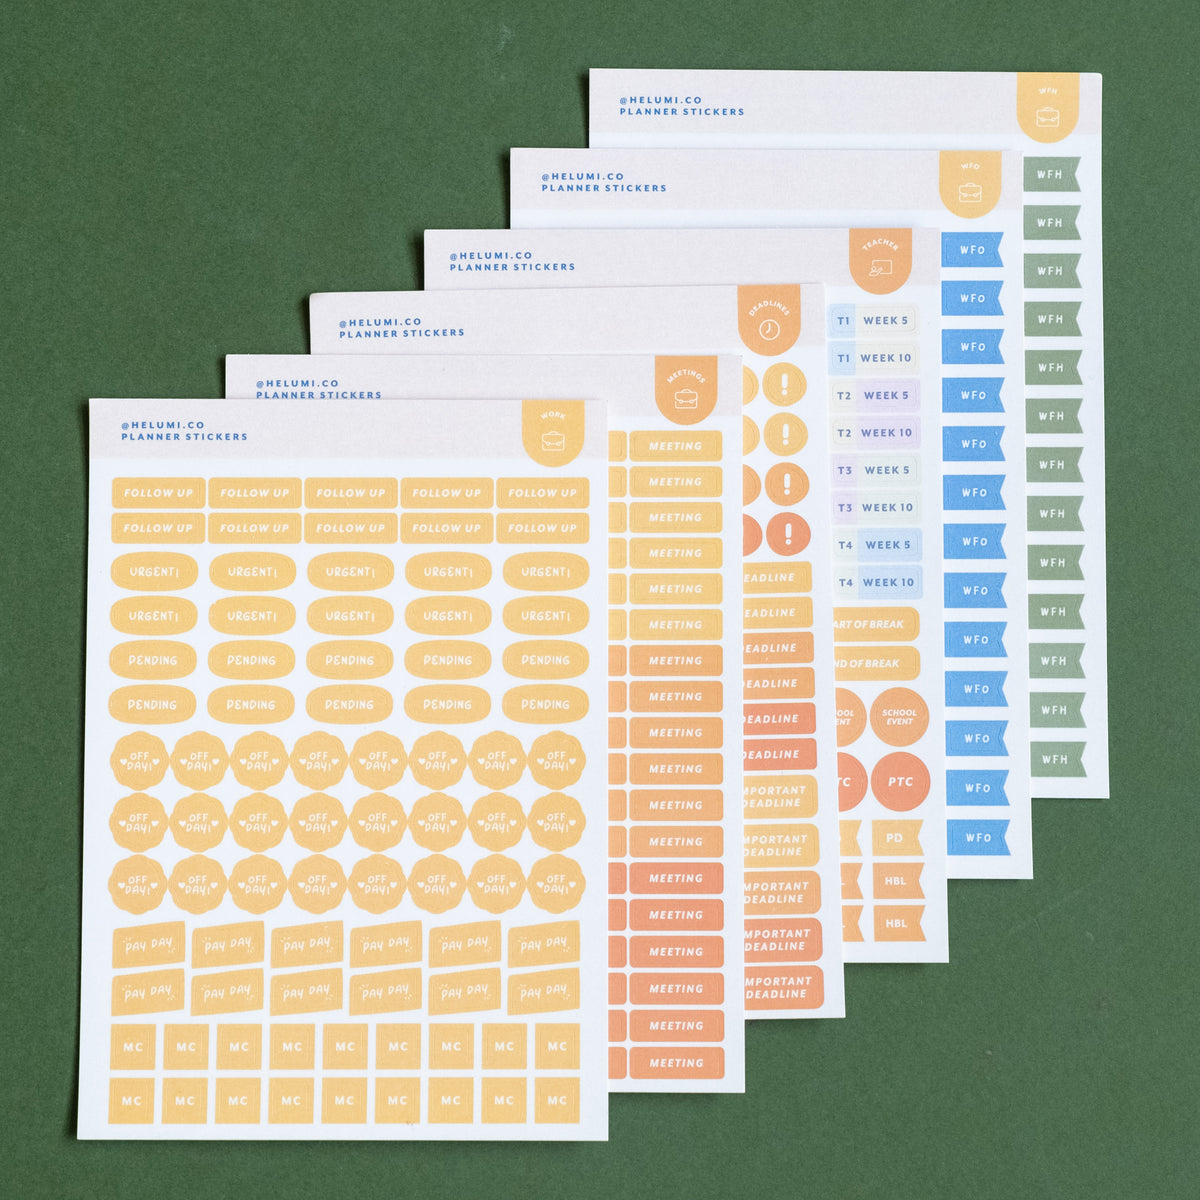 WFO (Work from Office) - Colour-coded Planner Sticker Sheet